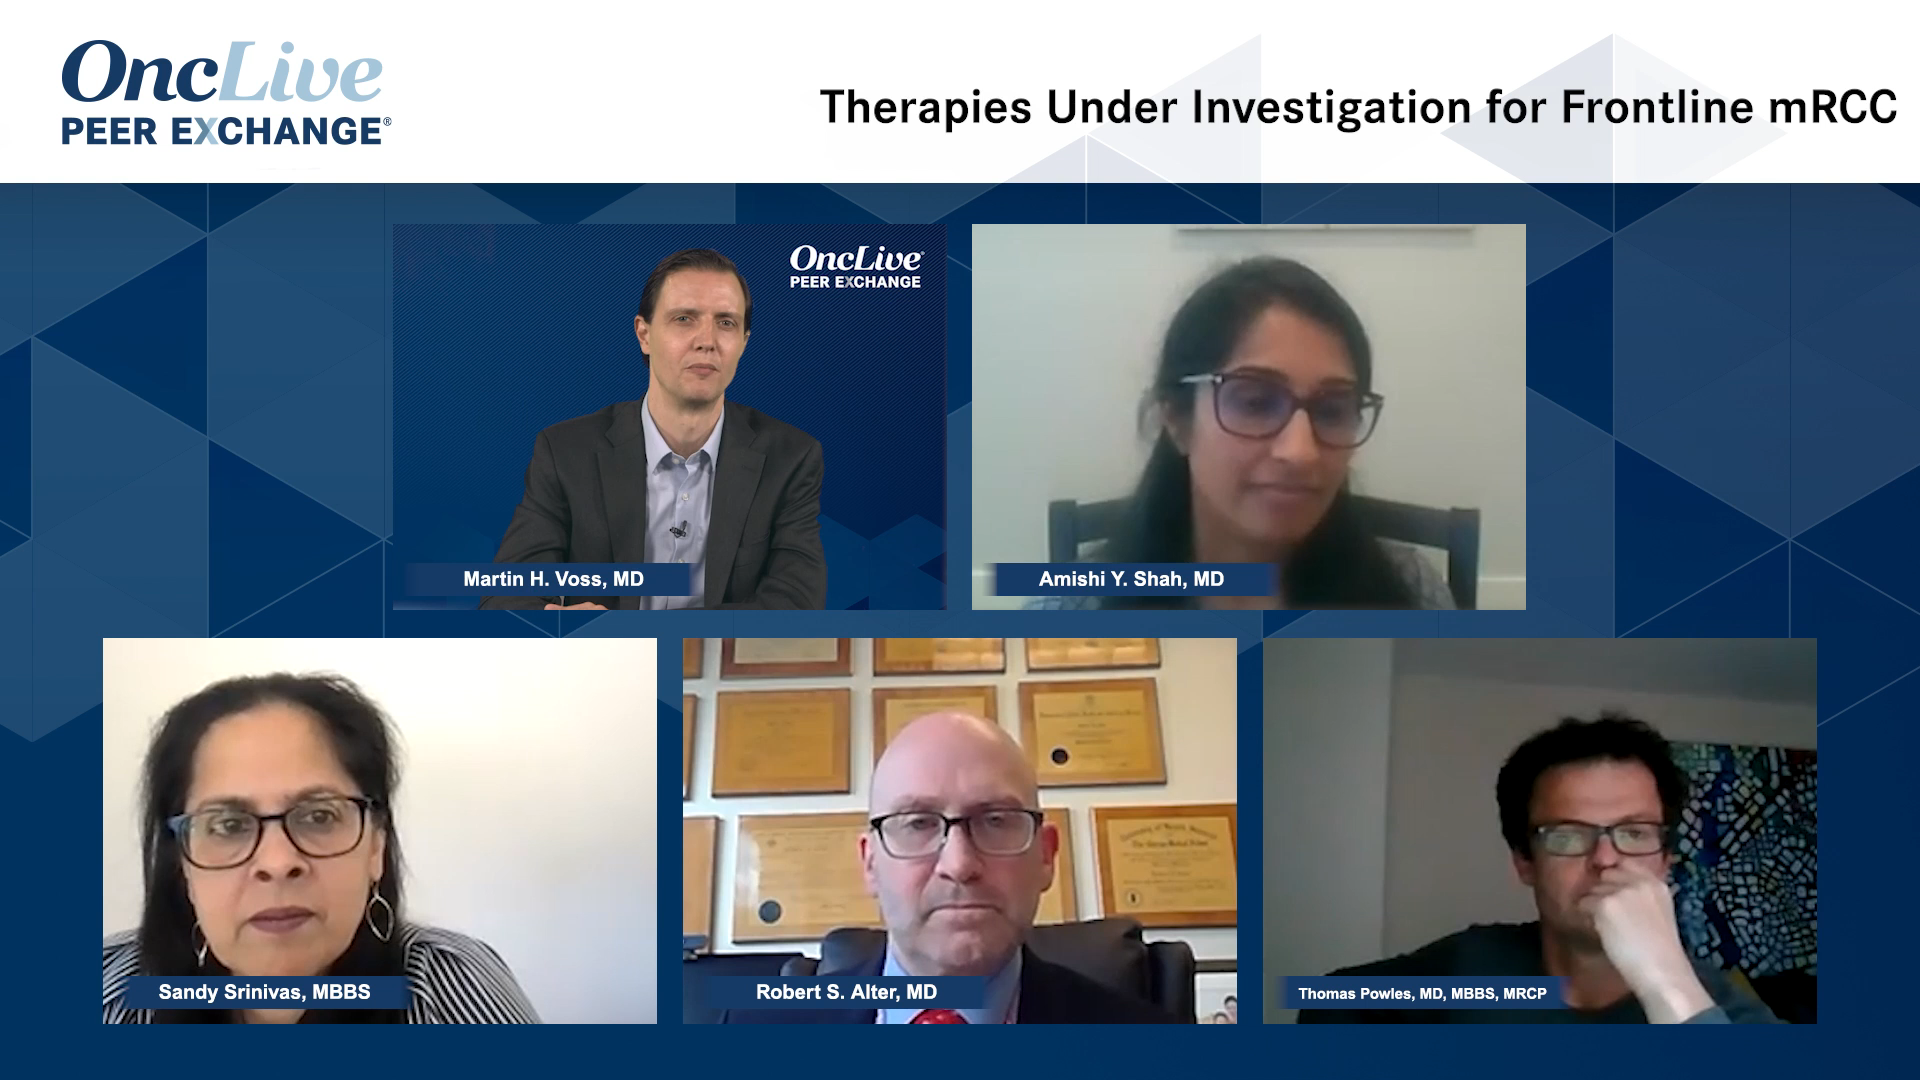 Therapies Under Investigation for Frontline mRCC